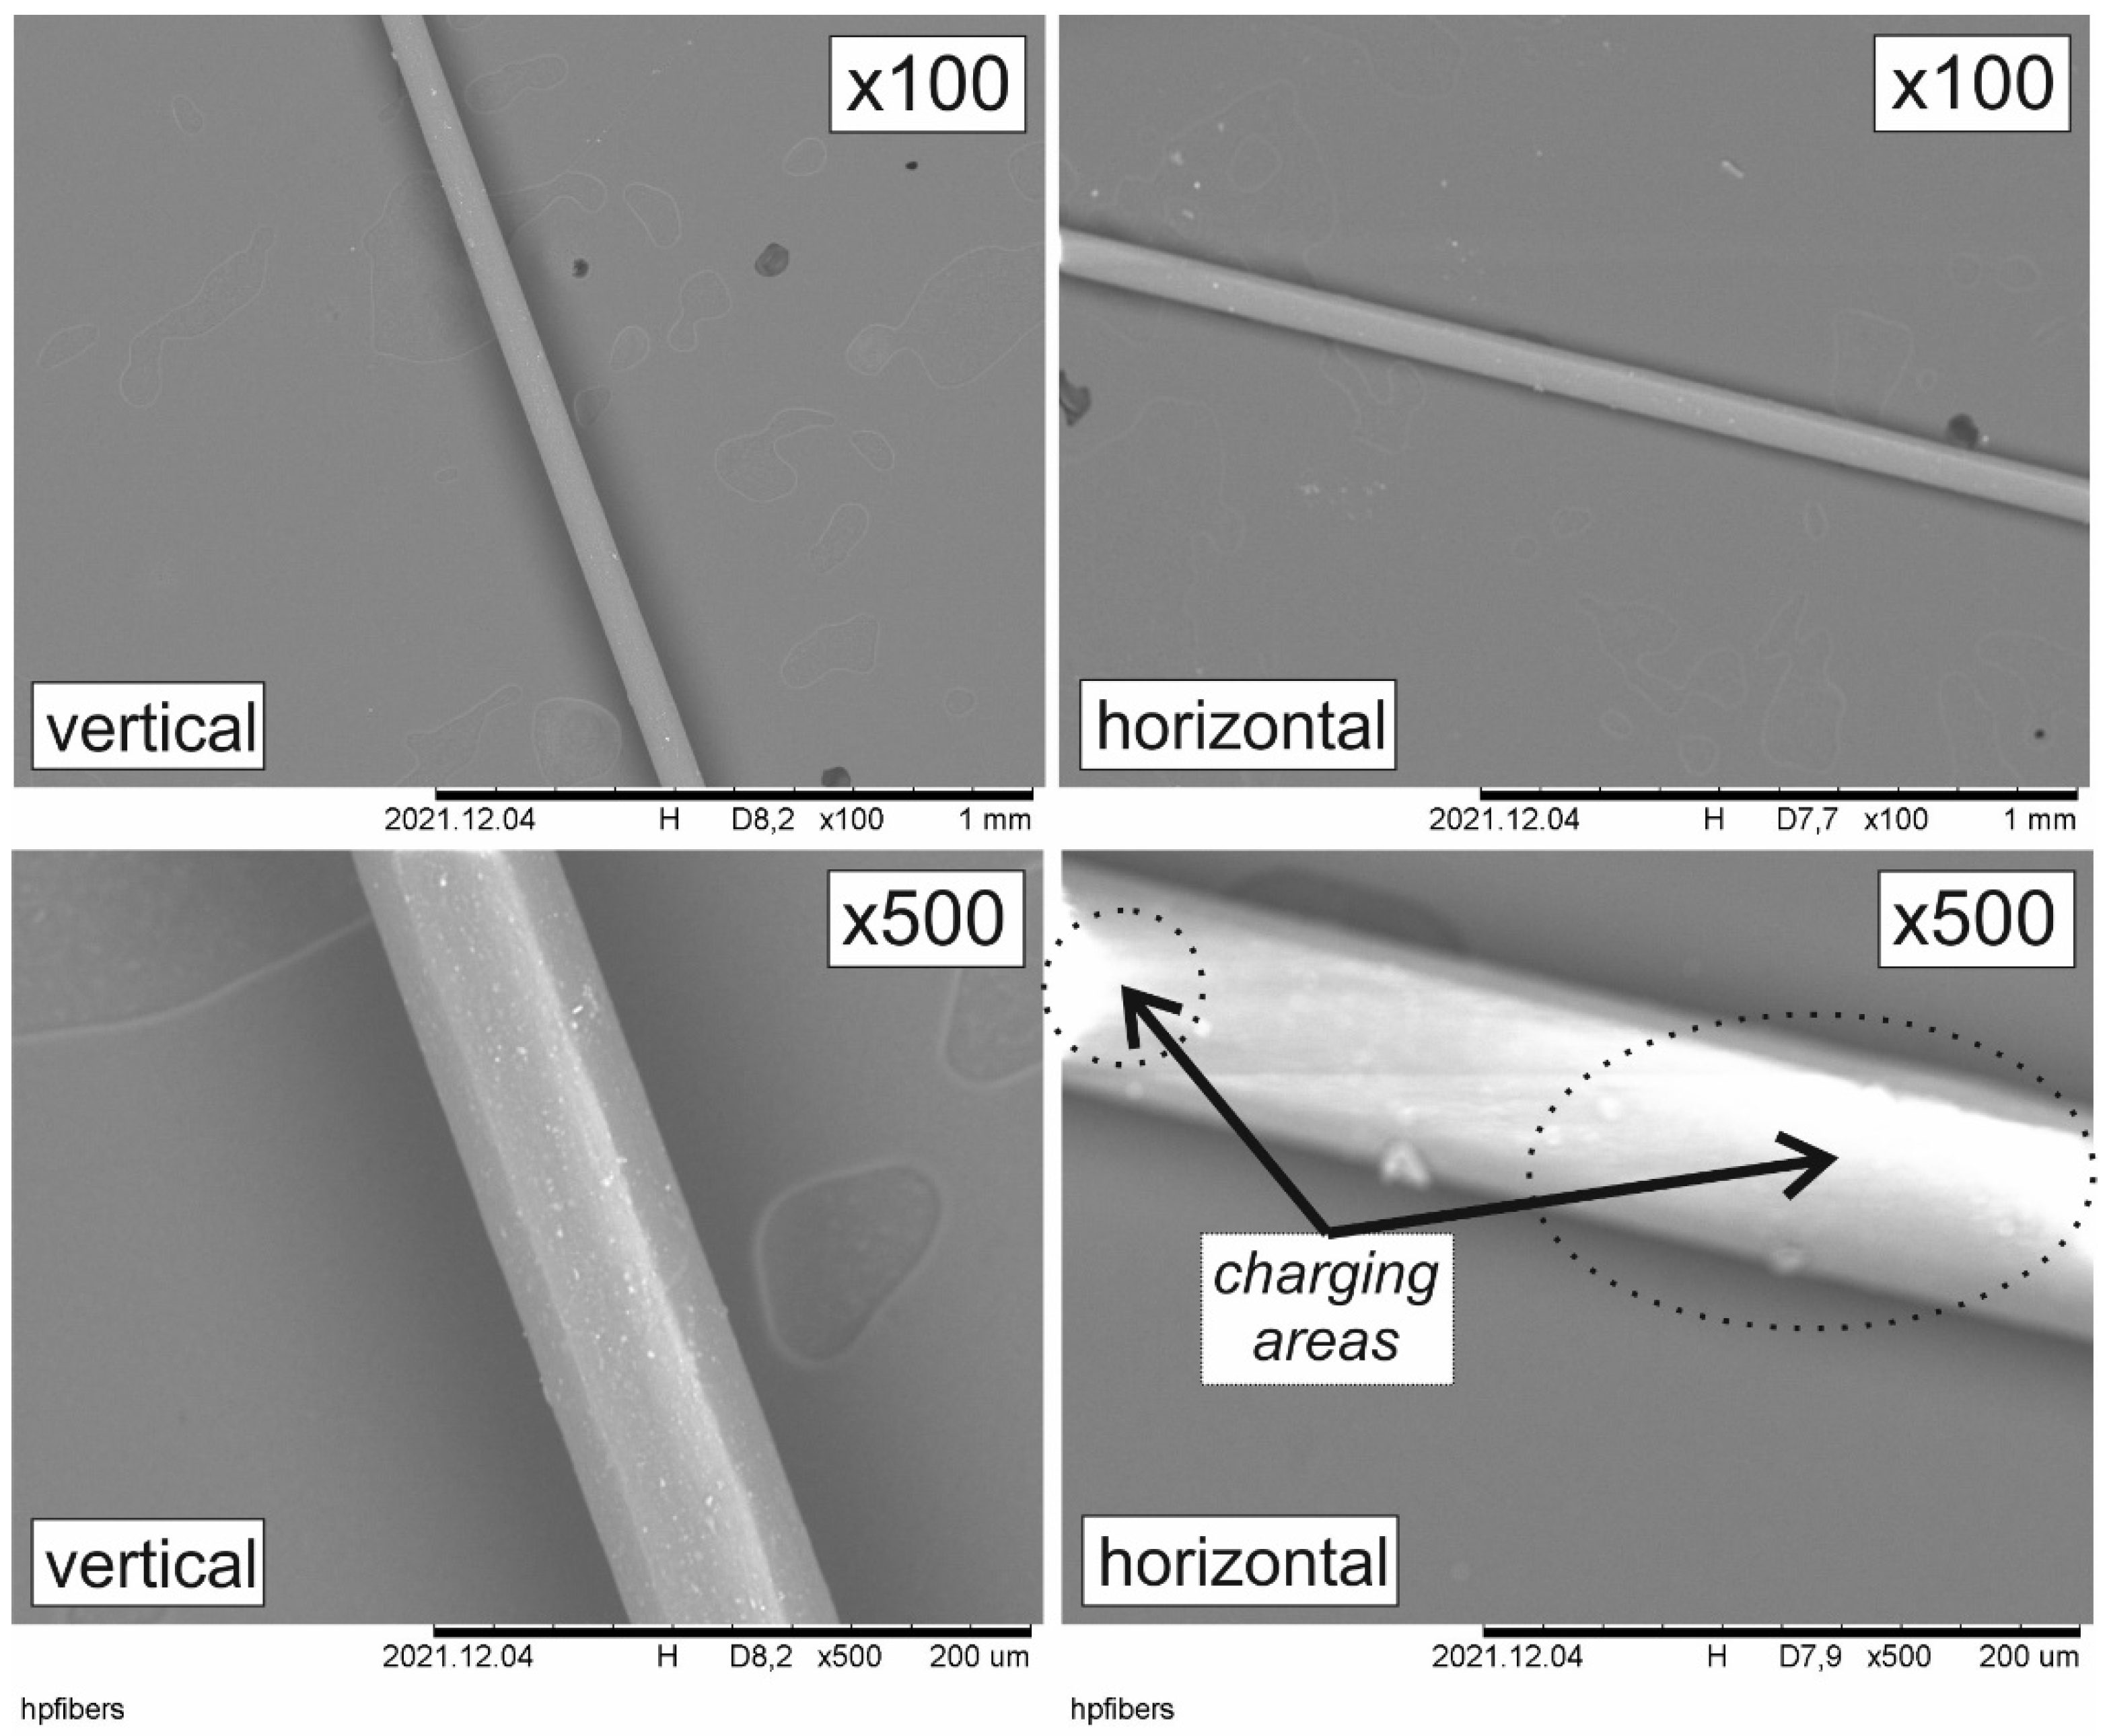 Textiles Full-Text | High-Performance and Functional Fiber Materials&mdash;A Review of Properties, Scanning Electron Microscopy SEM Electron Dispersive Spectroscopy EDS